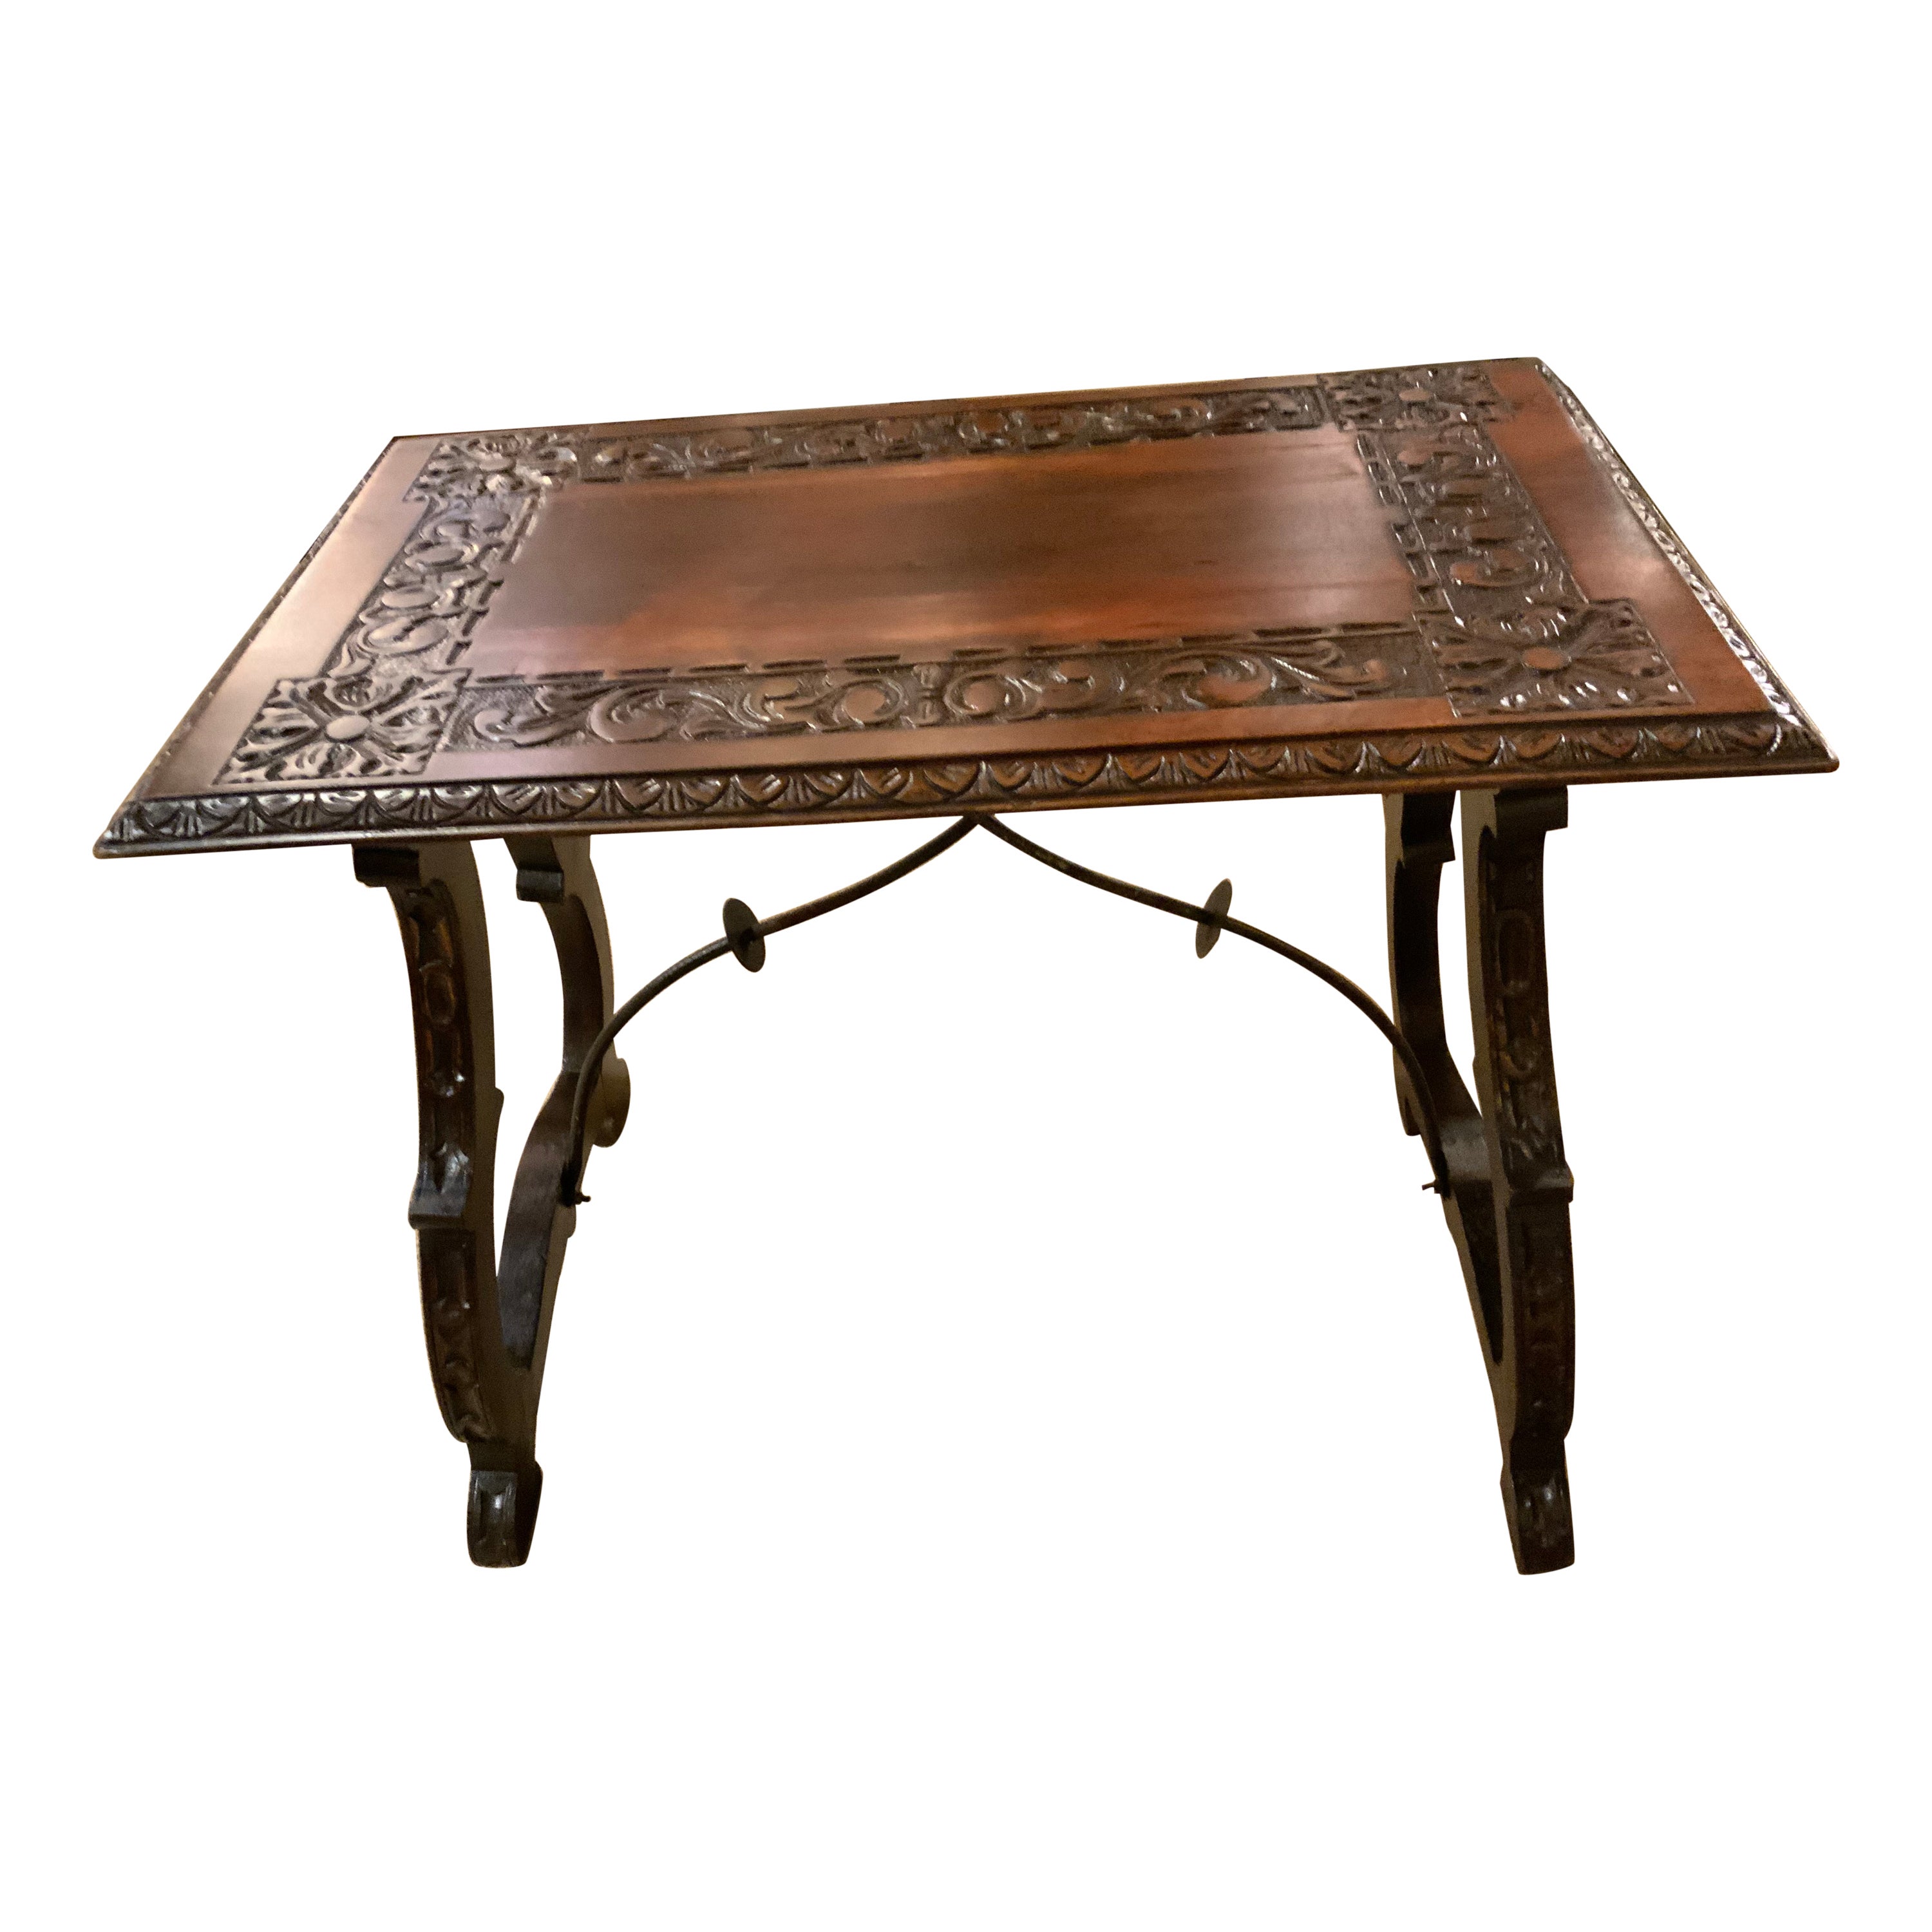 Spanish Baroque Style Carved Table with Iron Stretcher 19th C